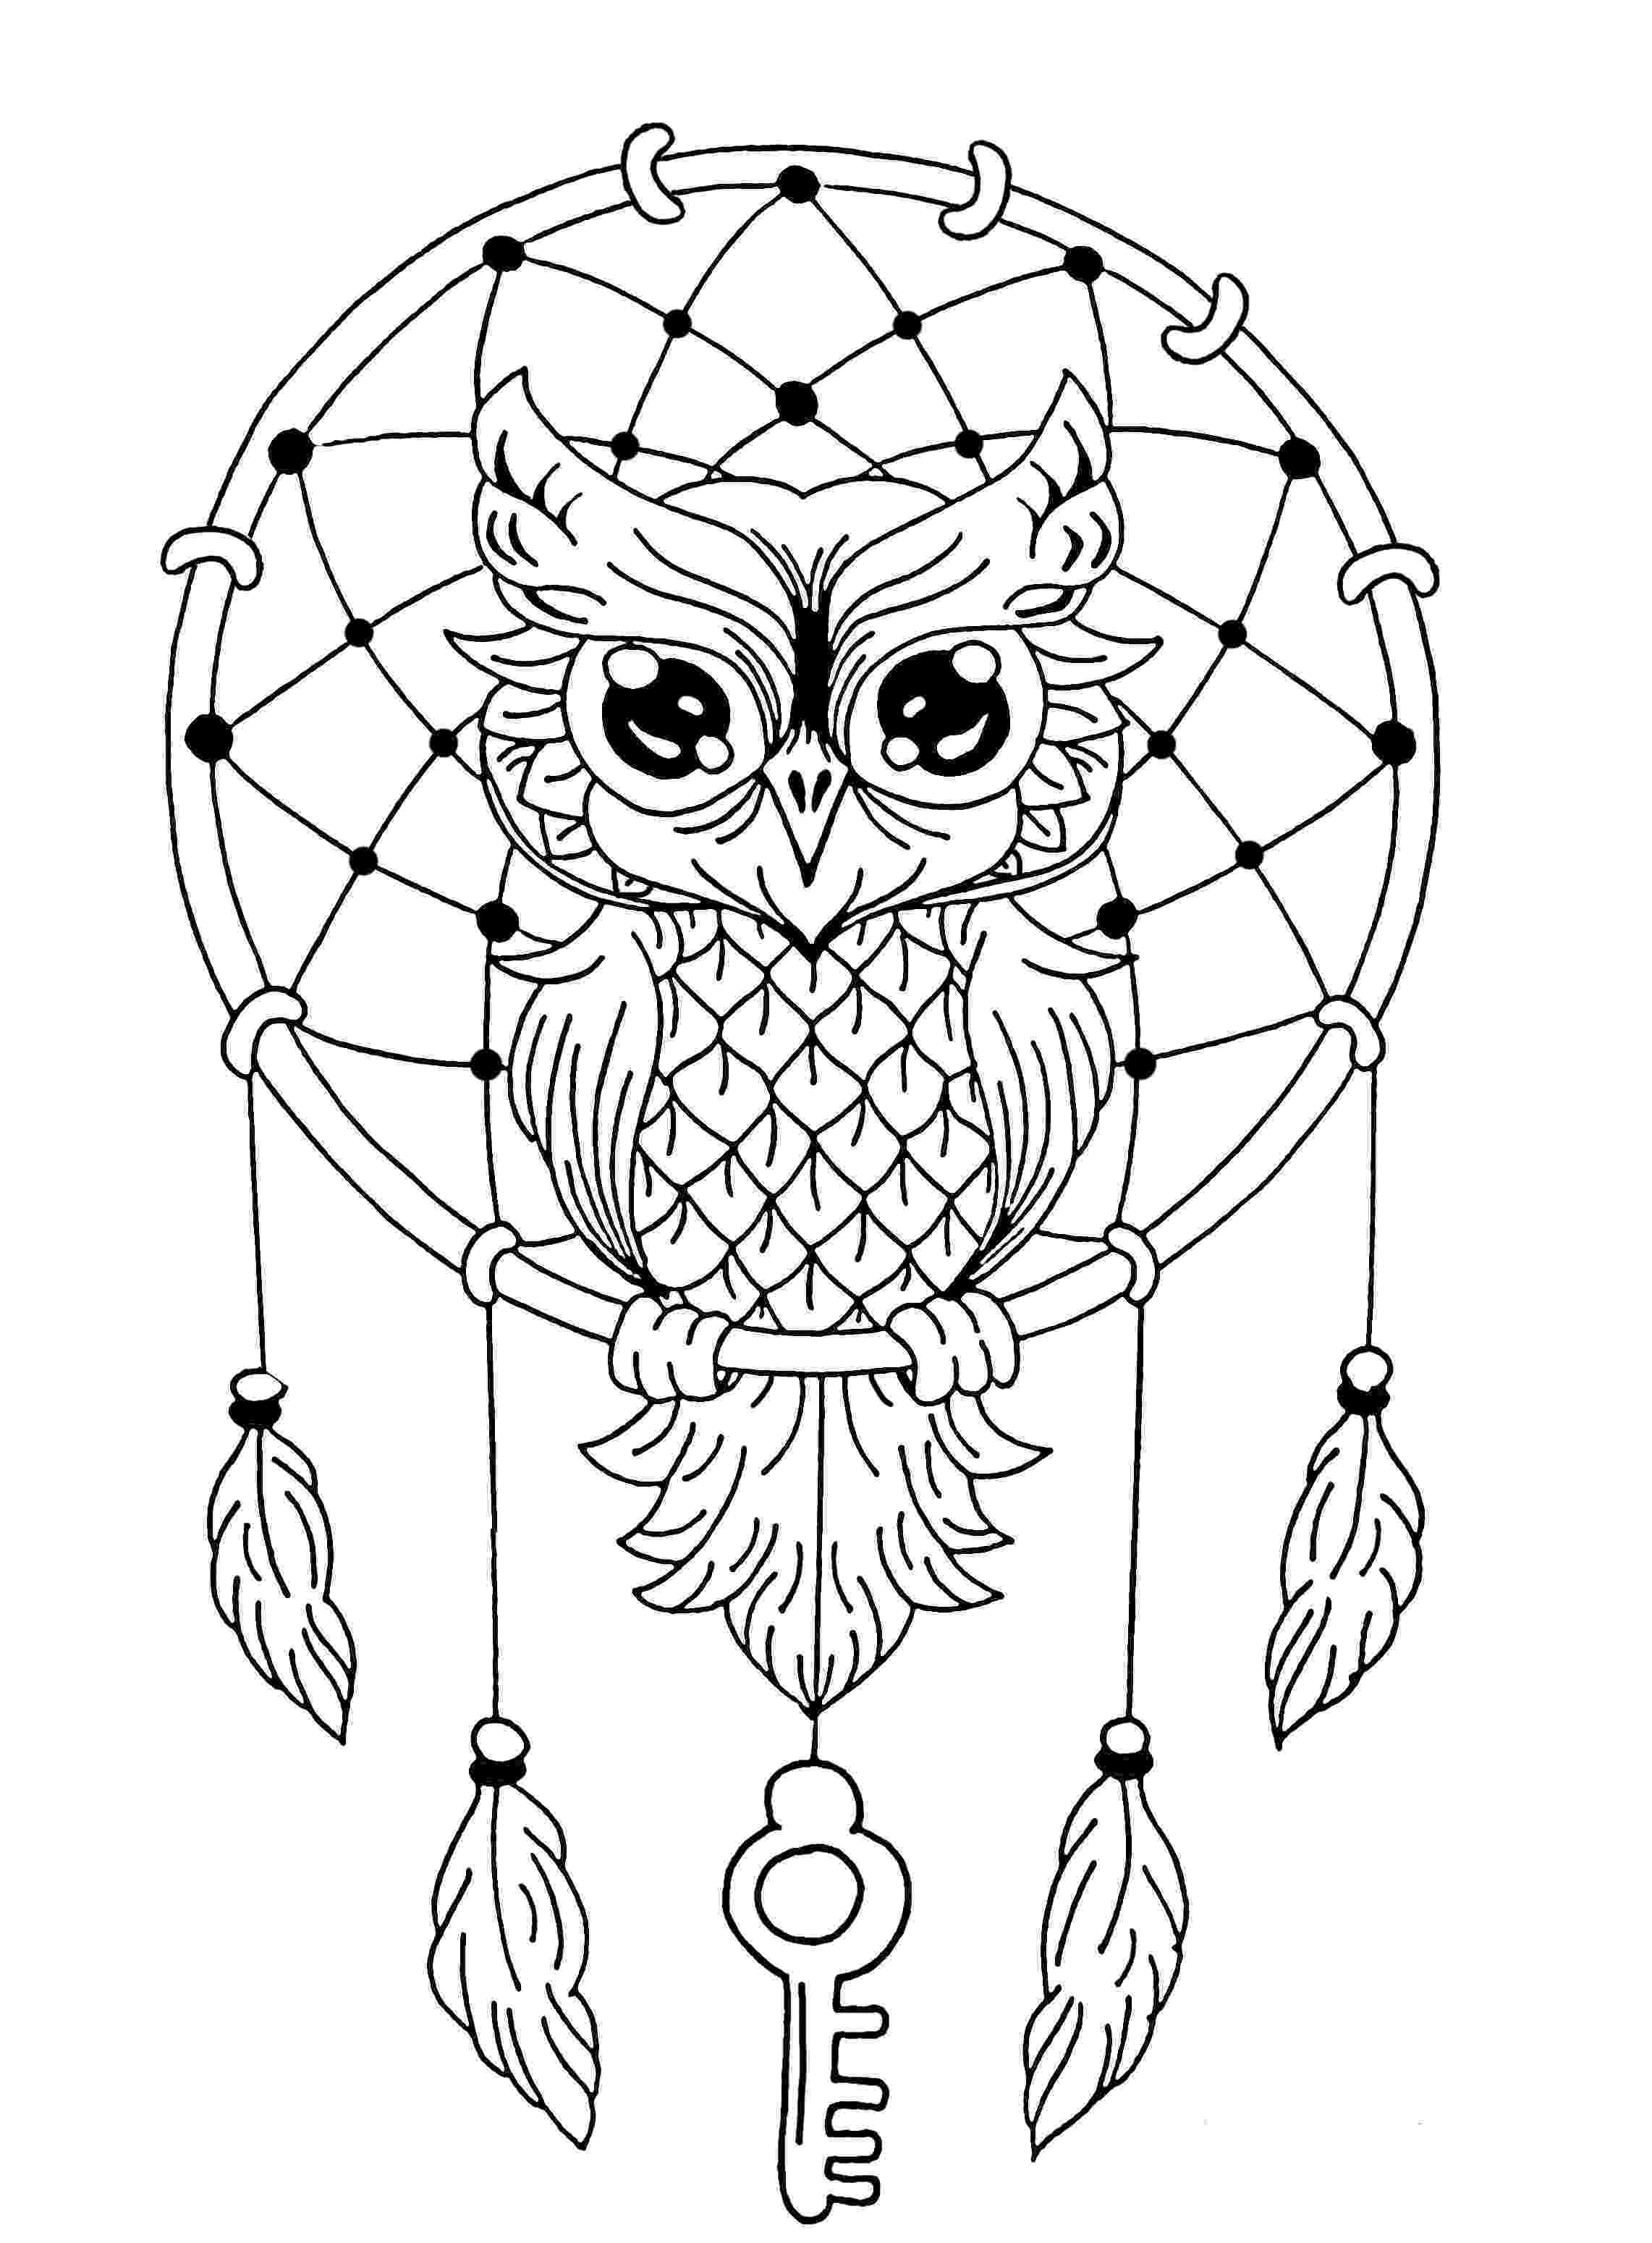 pics of owls to color owl crafts owls rock page 3 pics owls to of color 